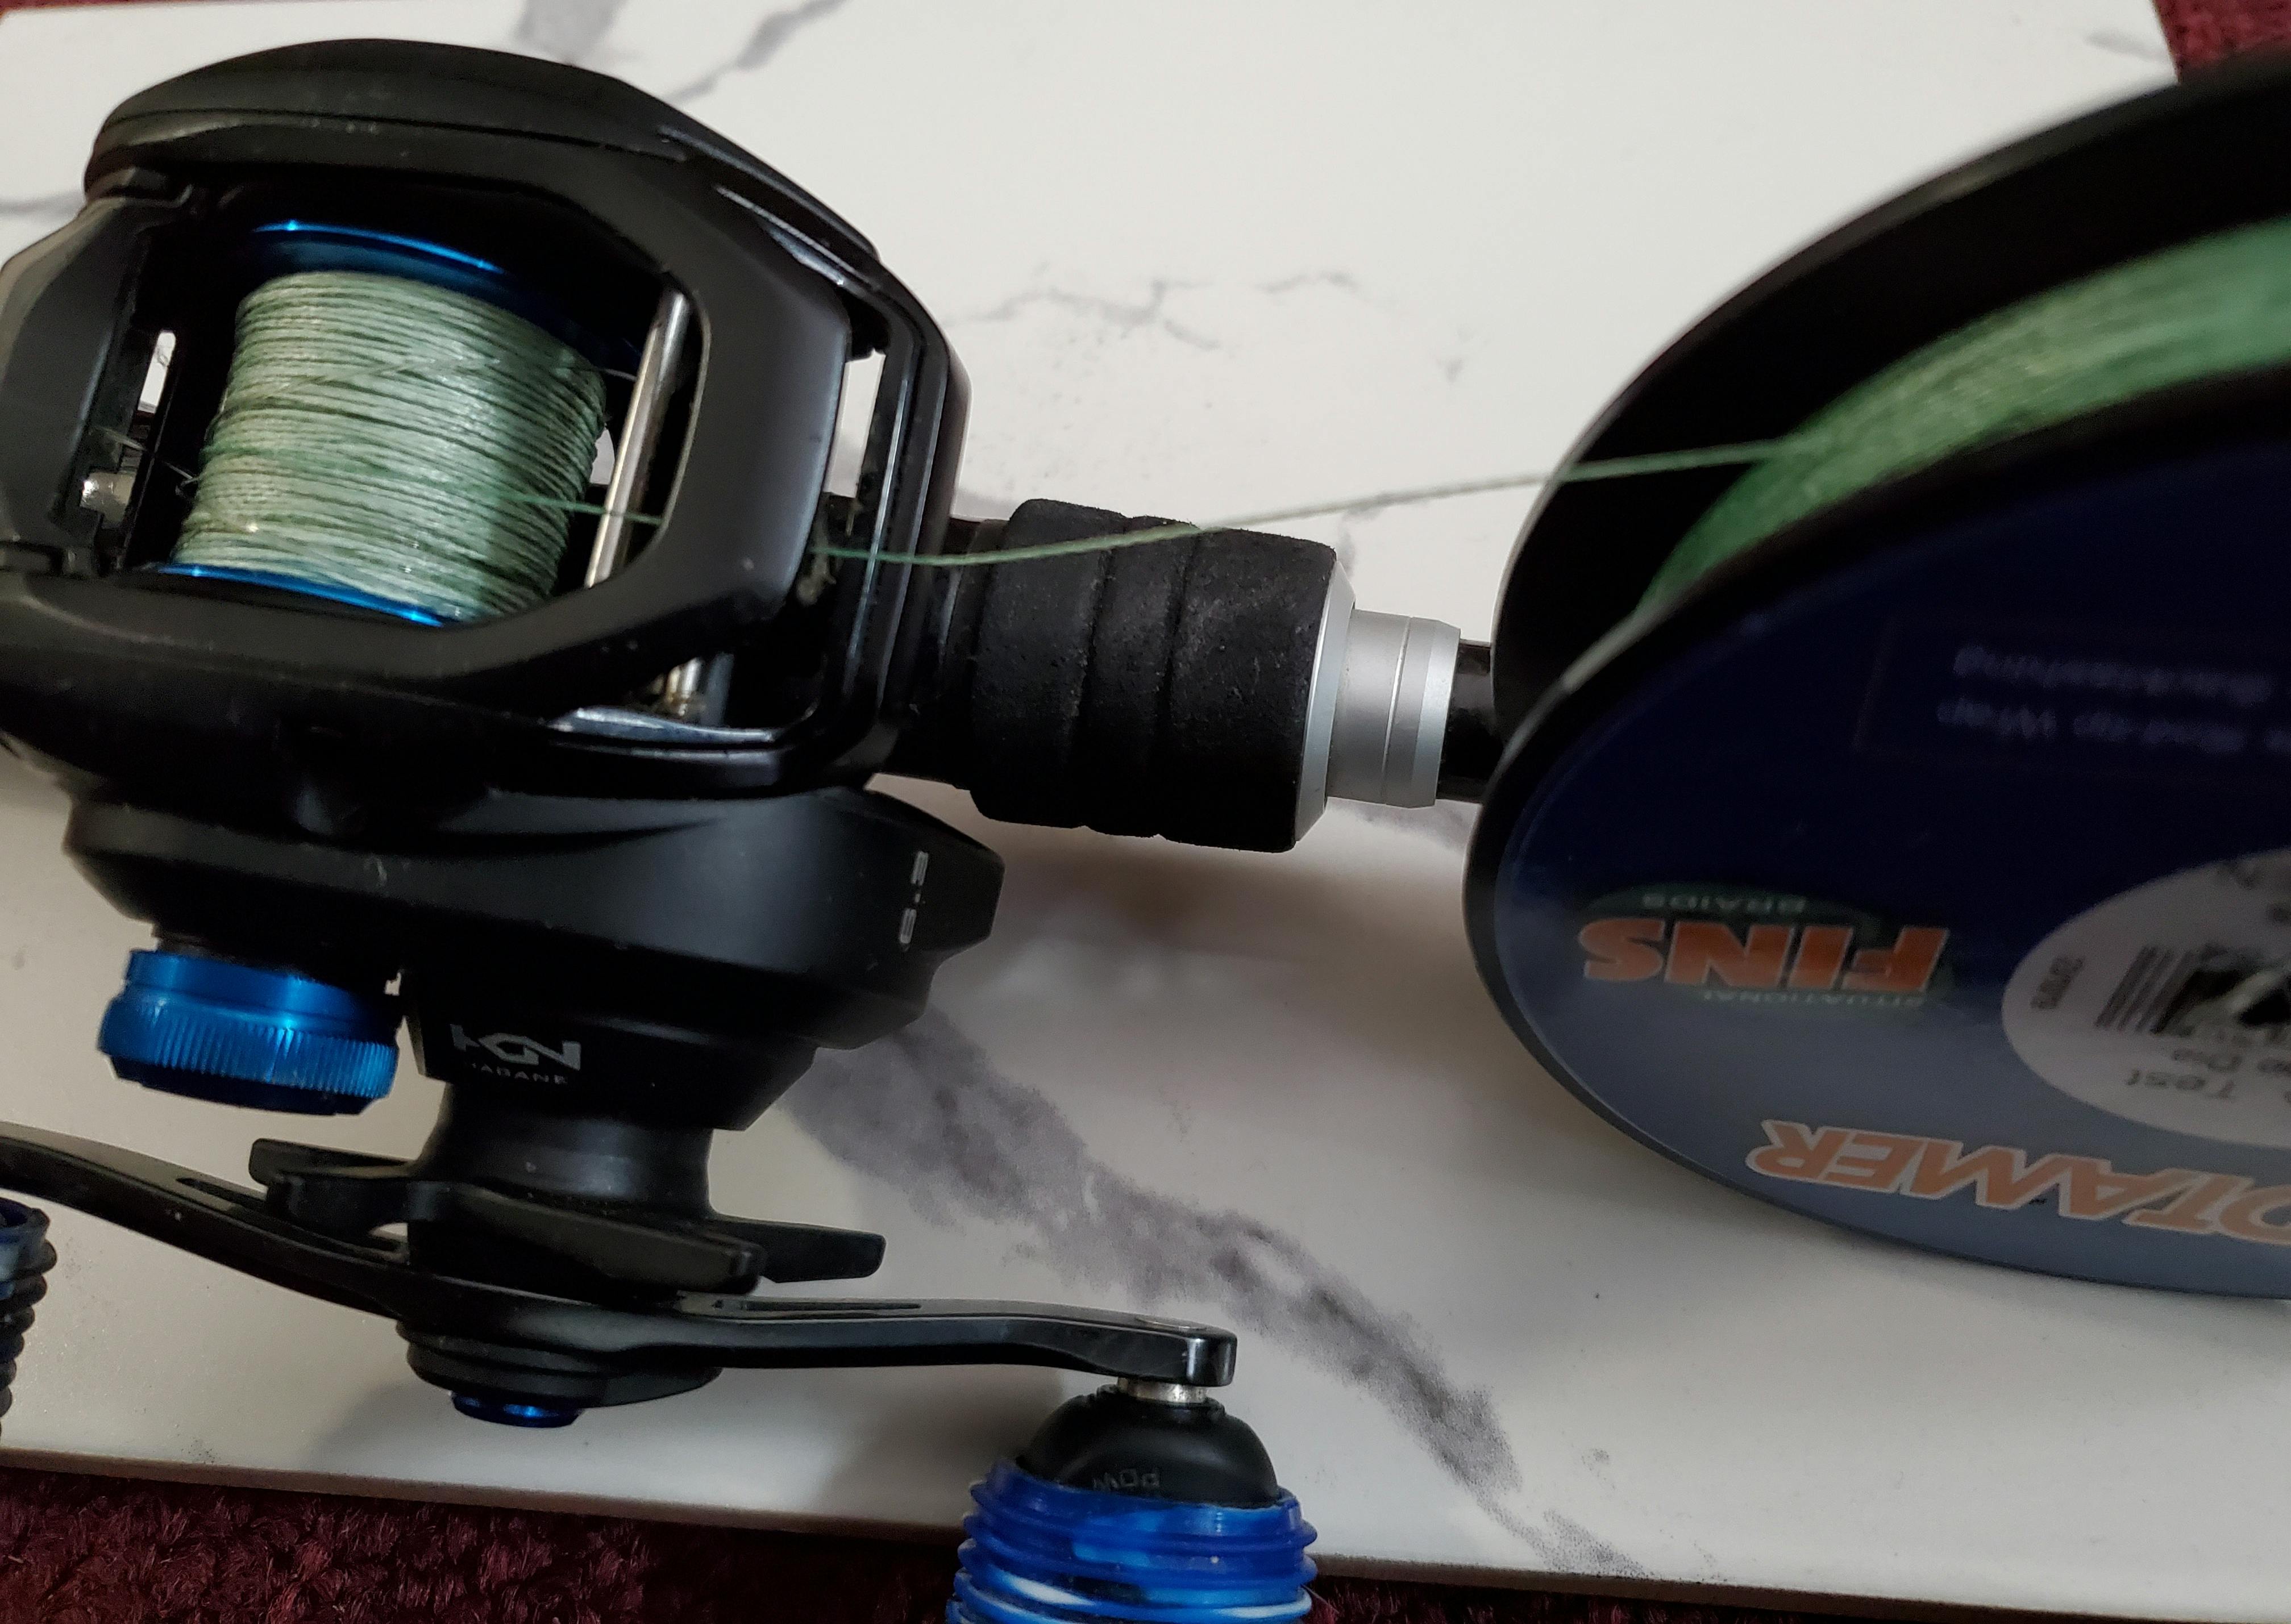 How to operate the baitcasting reel is not easy to blow up the line, j –  Sougayilang